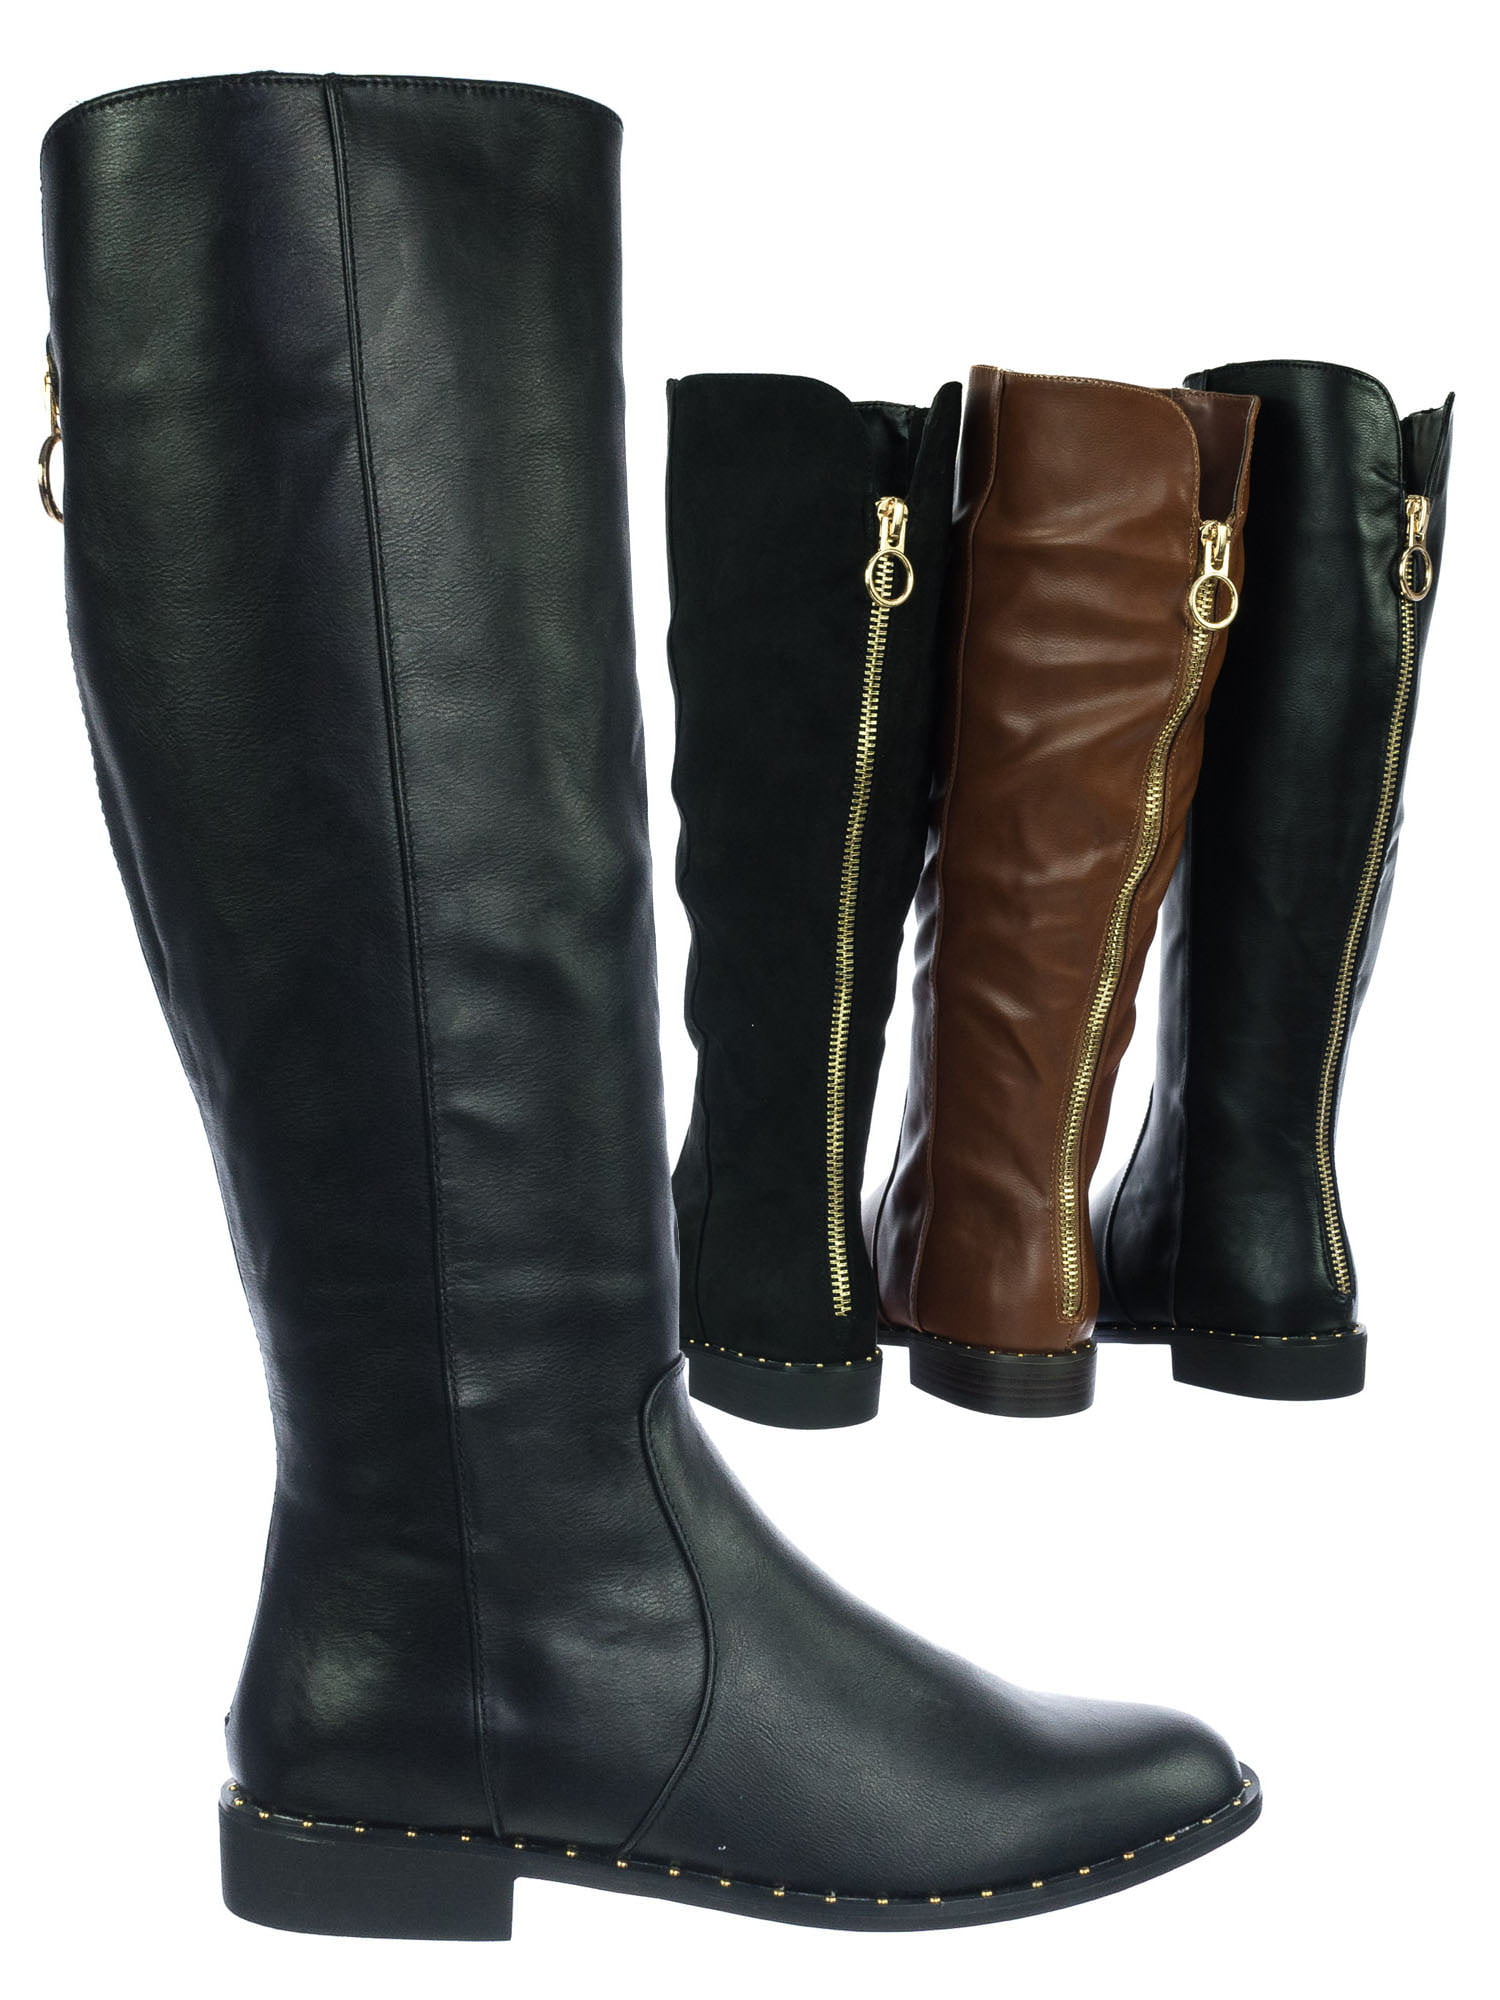 Montage77 F-Leathe Equestrian Winter Warm Fur-Lined Elastic Riding Boots 